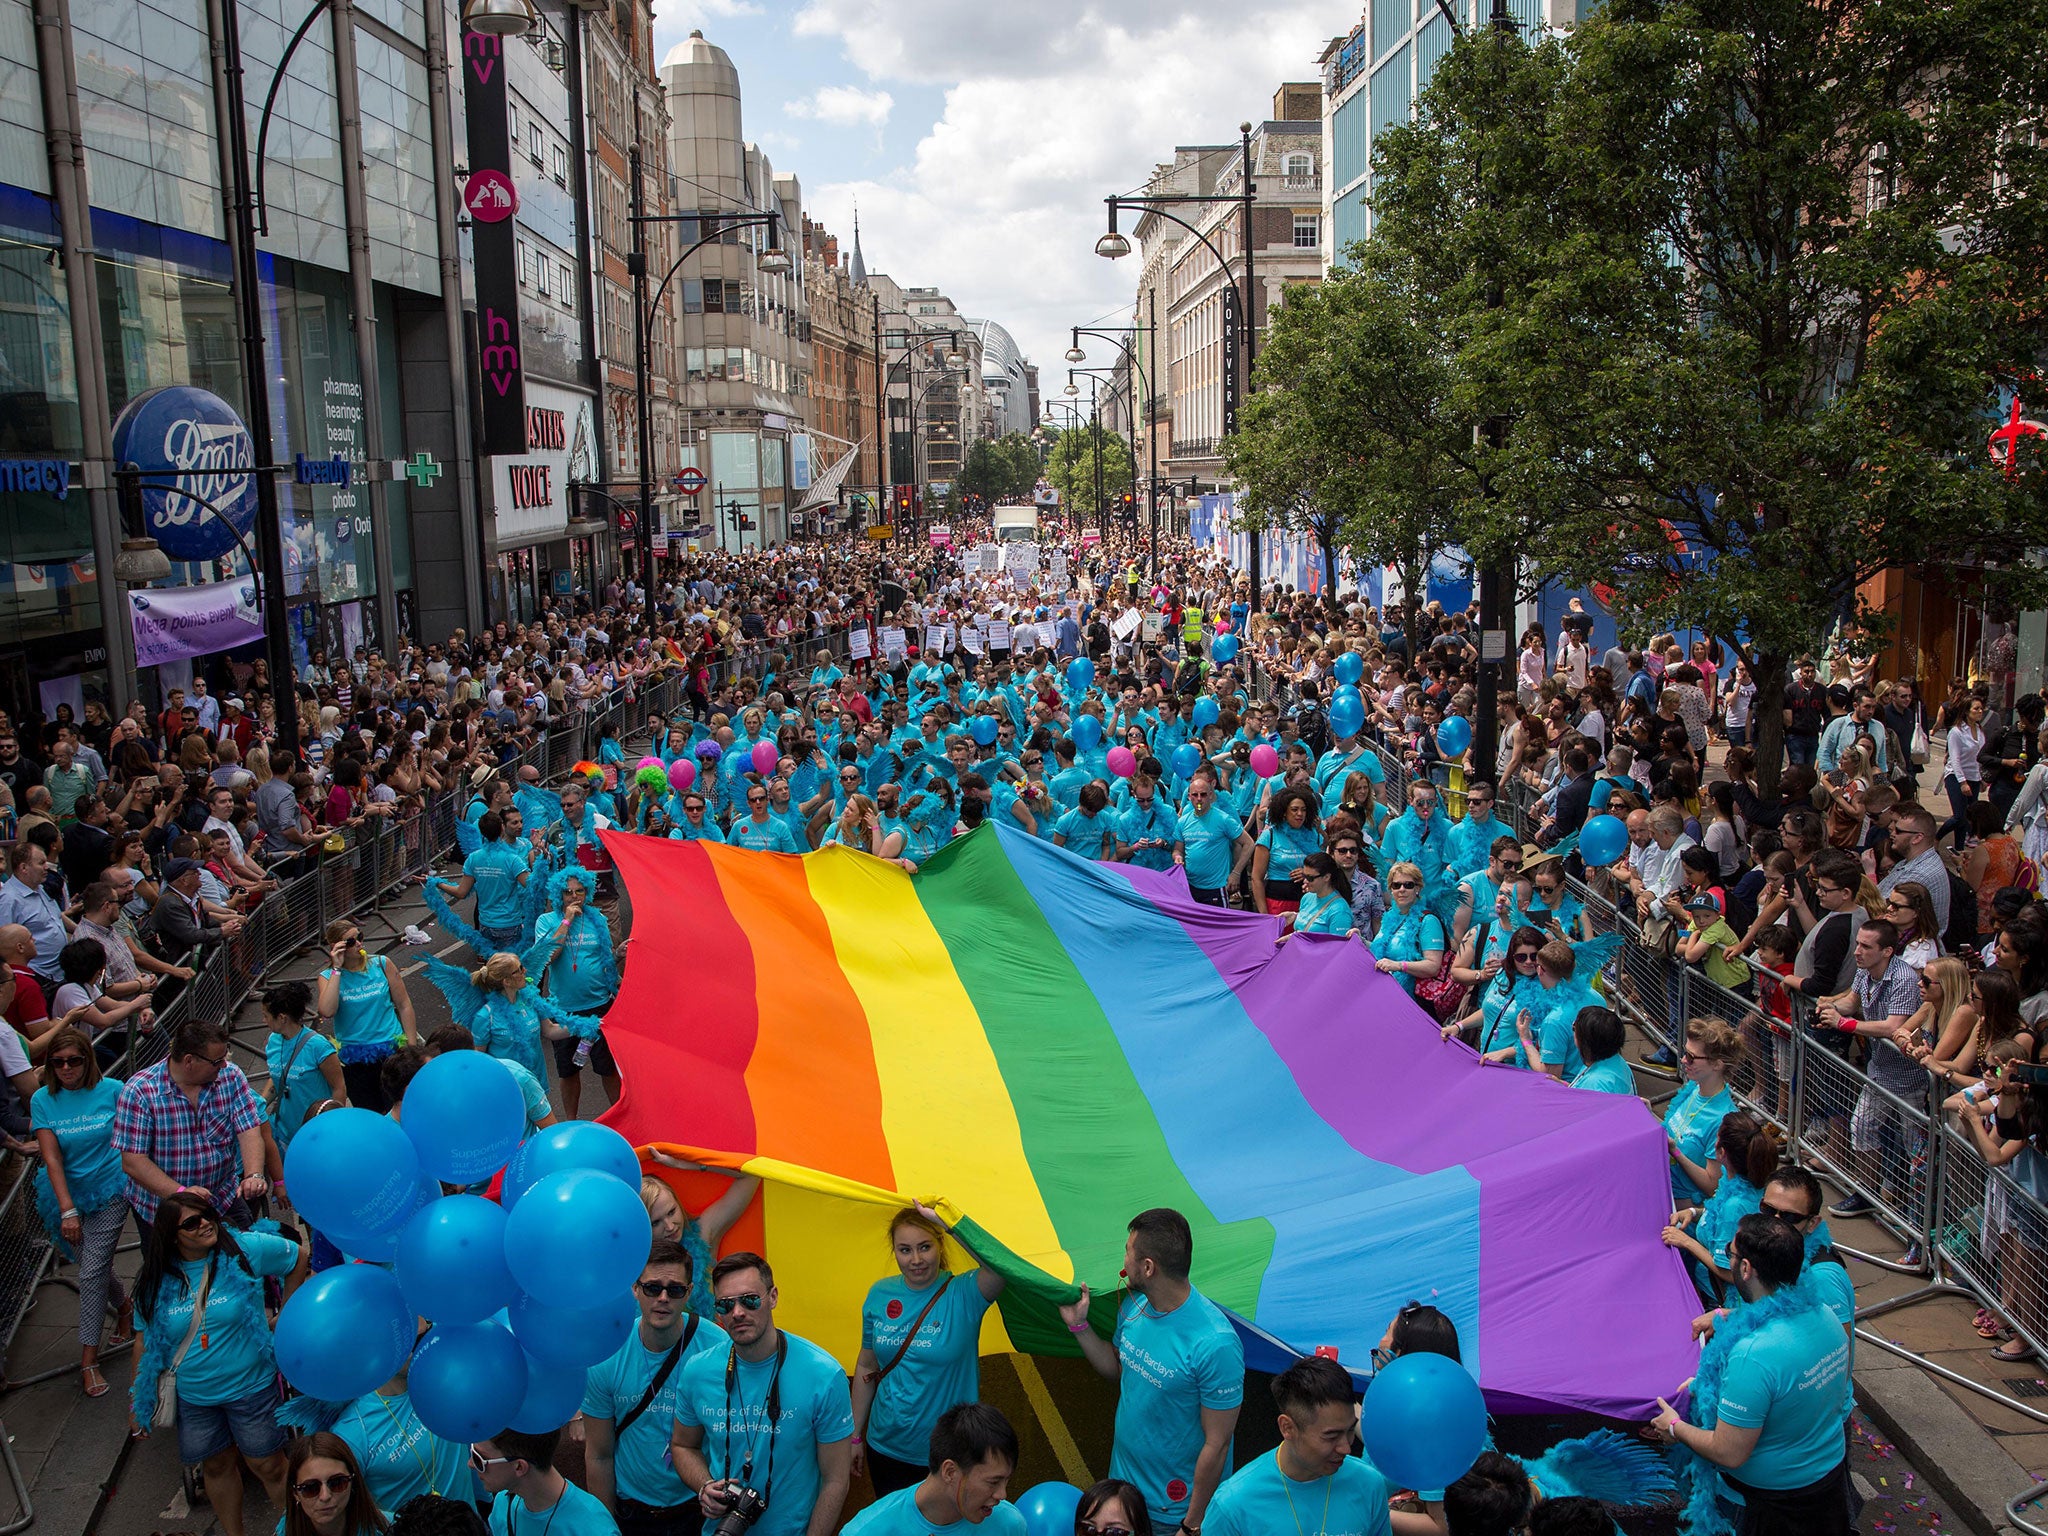 London Pride 30,000 take part in biggest ever gay pride parade The